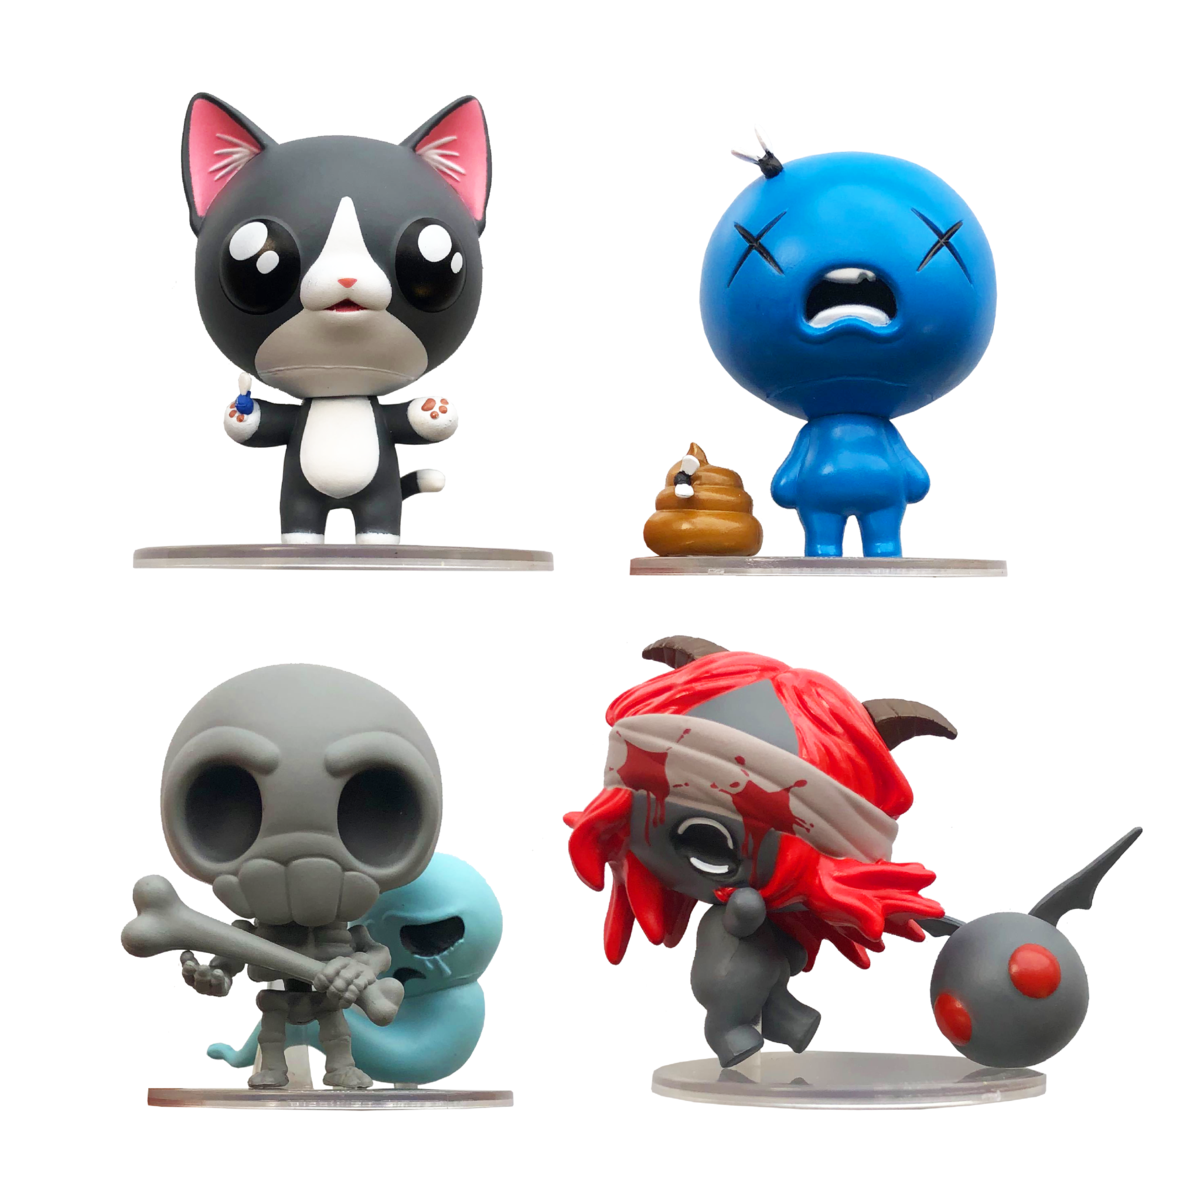 The Binding of Isaac: Collectible Figures - Series 2